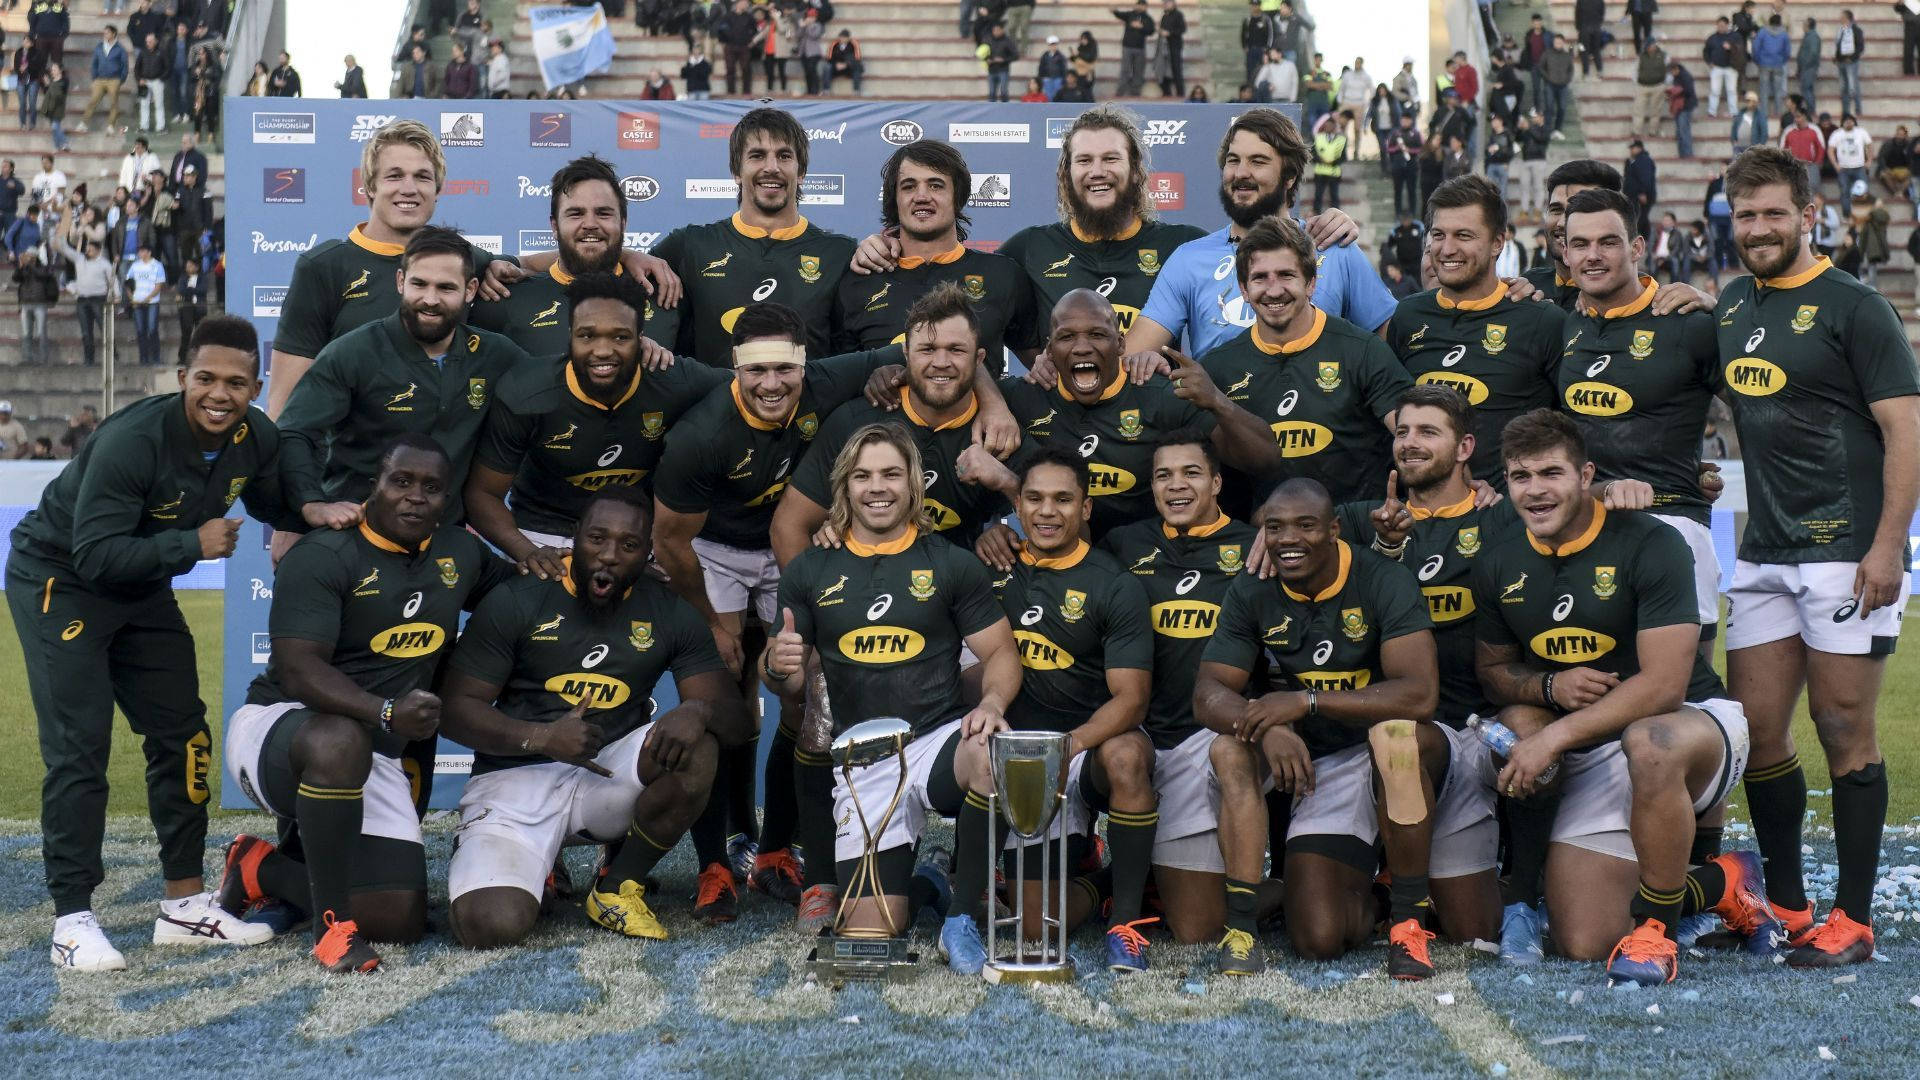 Rugby World 2019 Champions